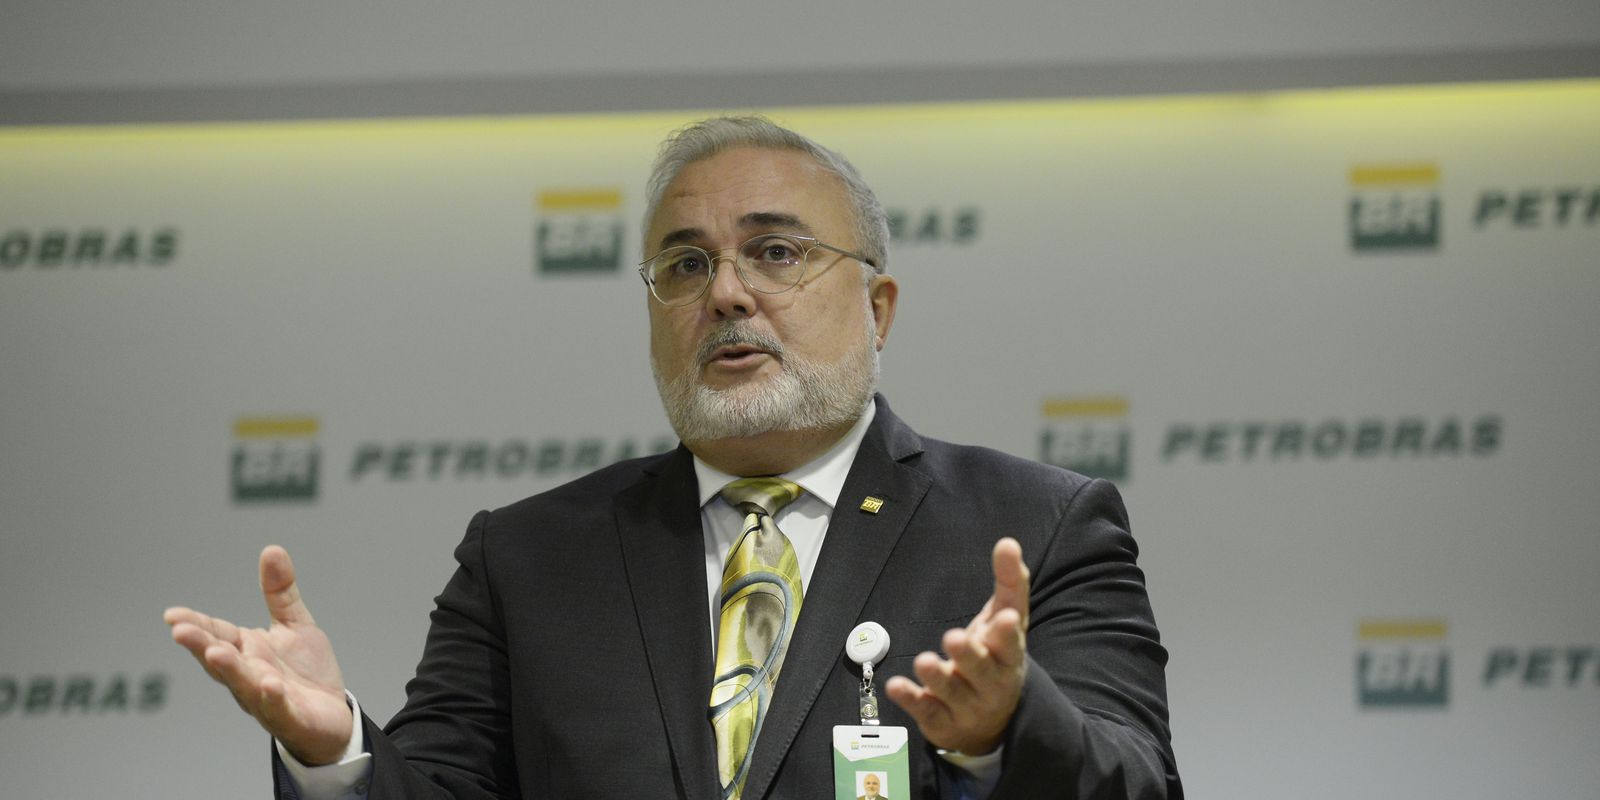 Petrobras president says he can reduce gasoline prices